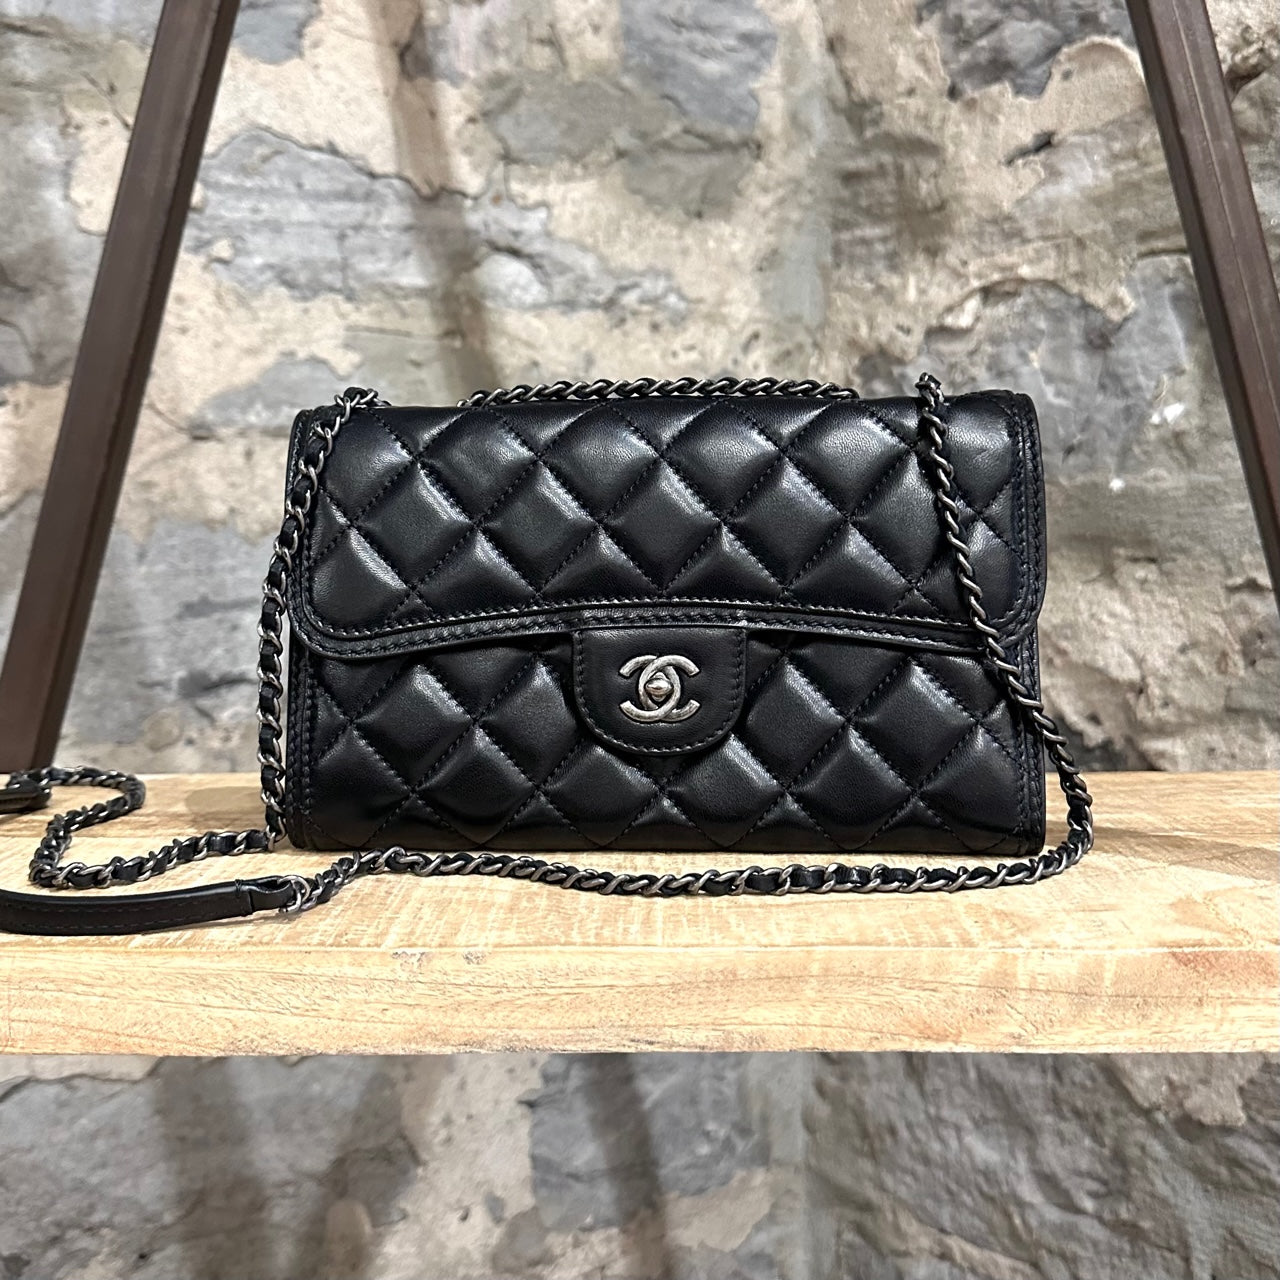 Chanel Black Lambskin Quilted Citizen Small Flap Chain Bag